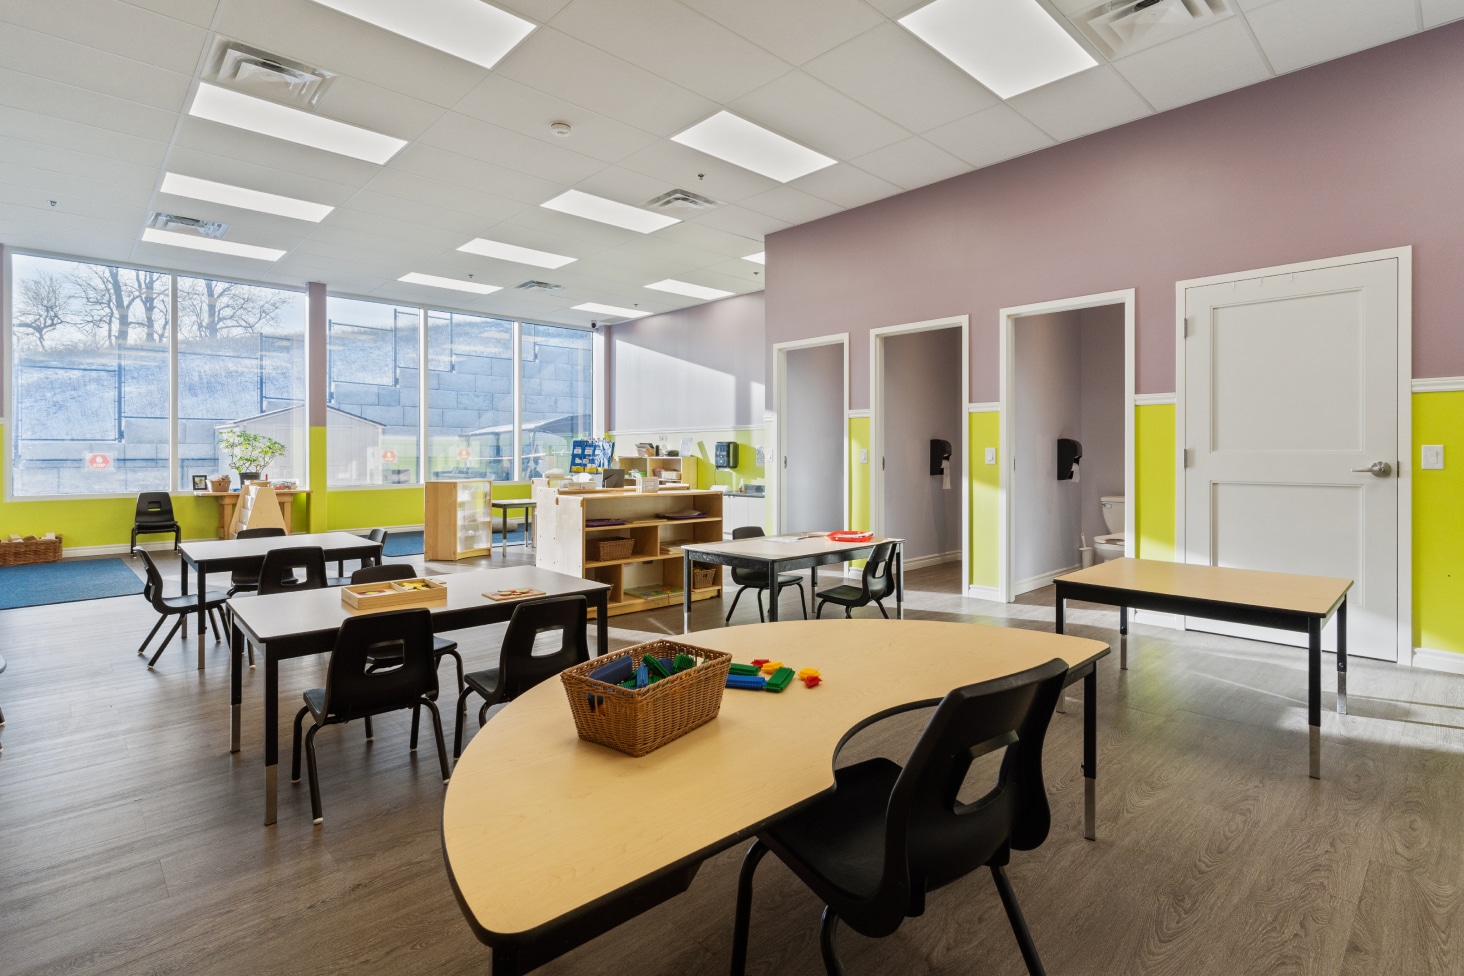 An early learning centre with tables and chairs in a purple and yellow color scheme.